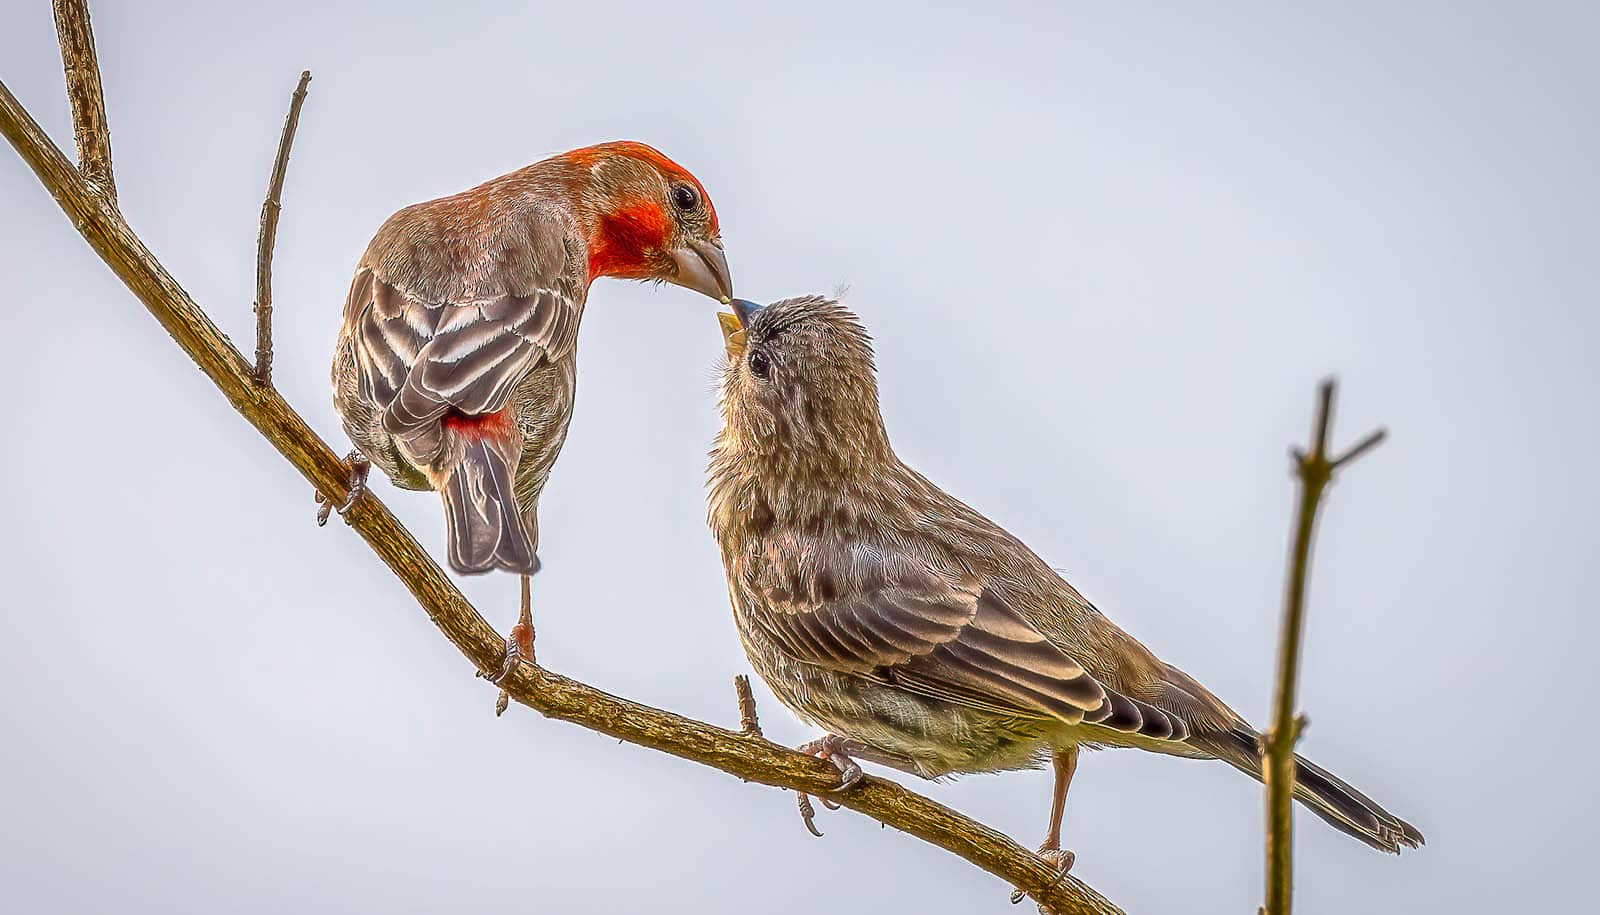 two small brown birds, one with red on its head, meet beaks on a branch